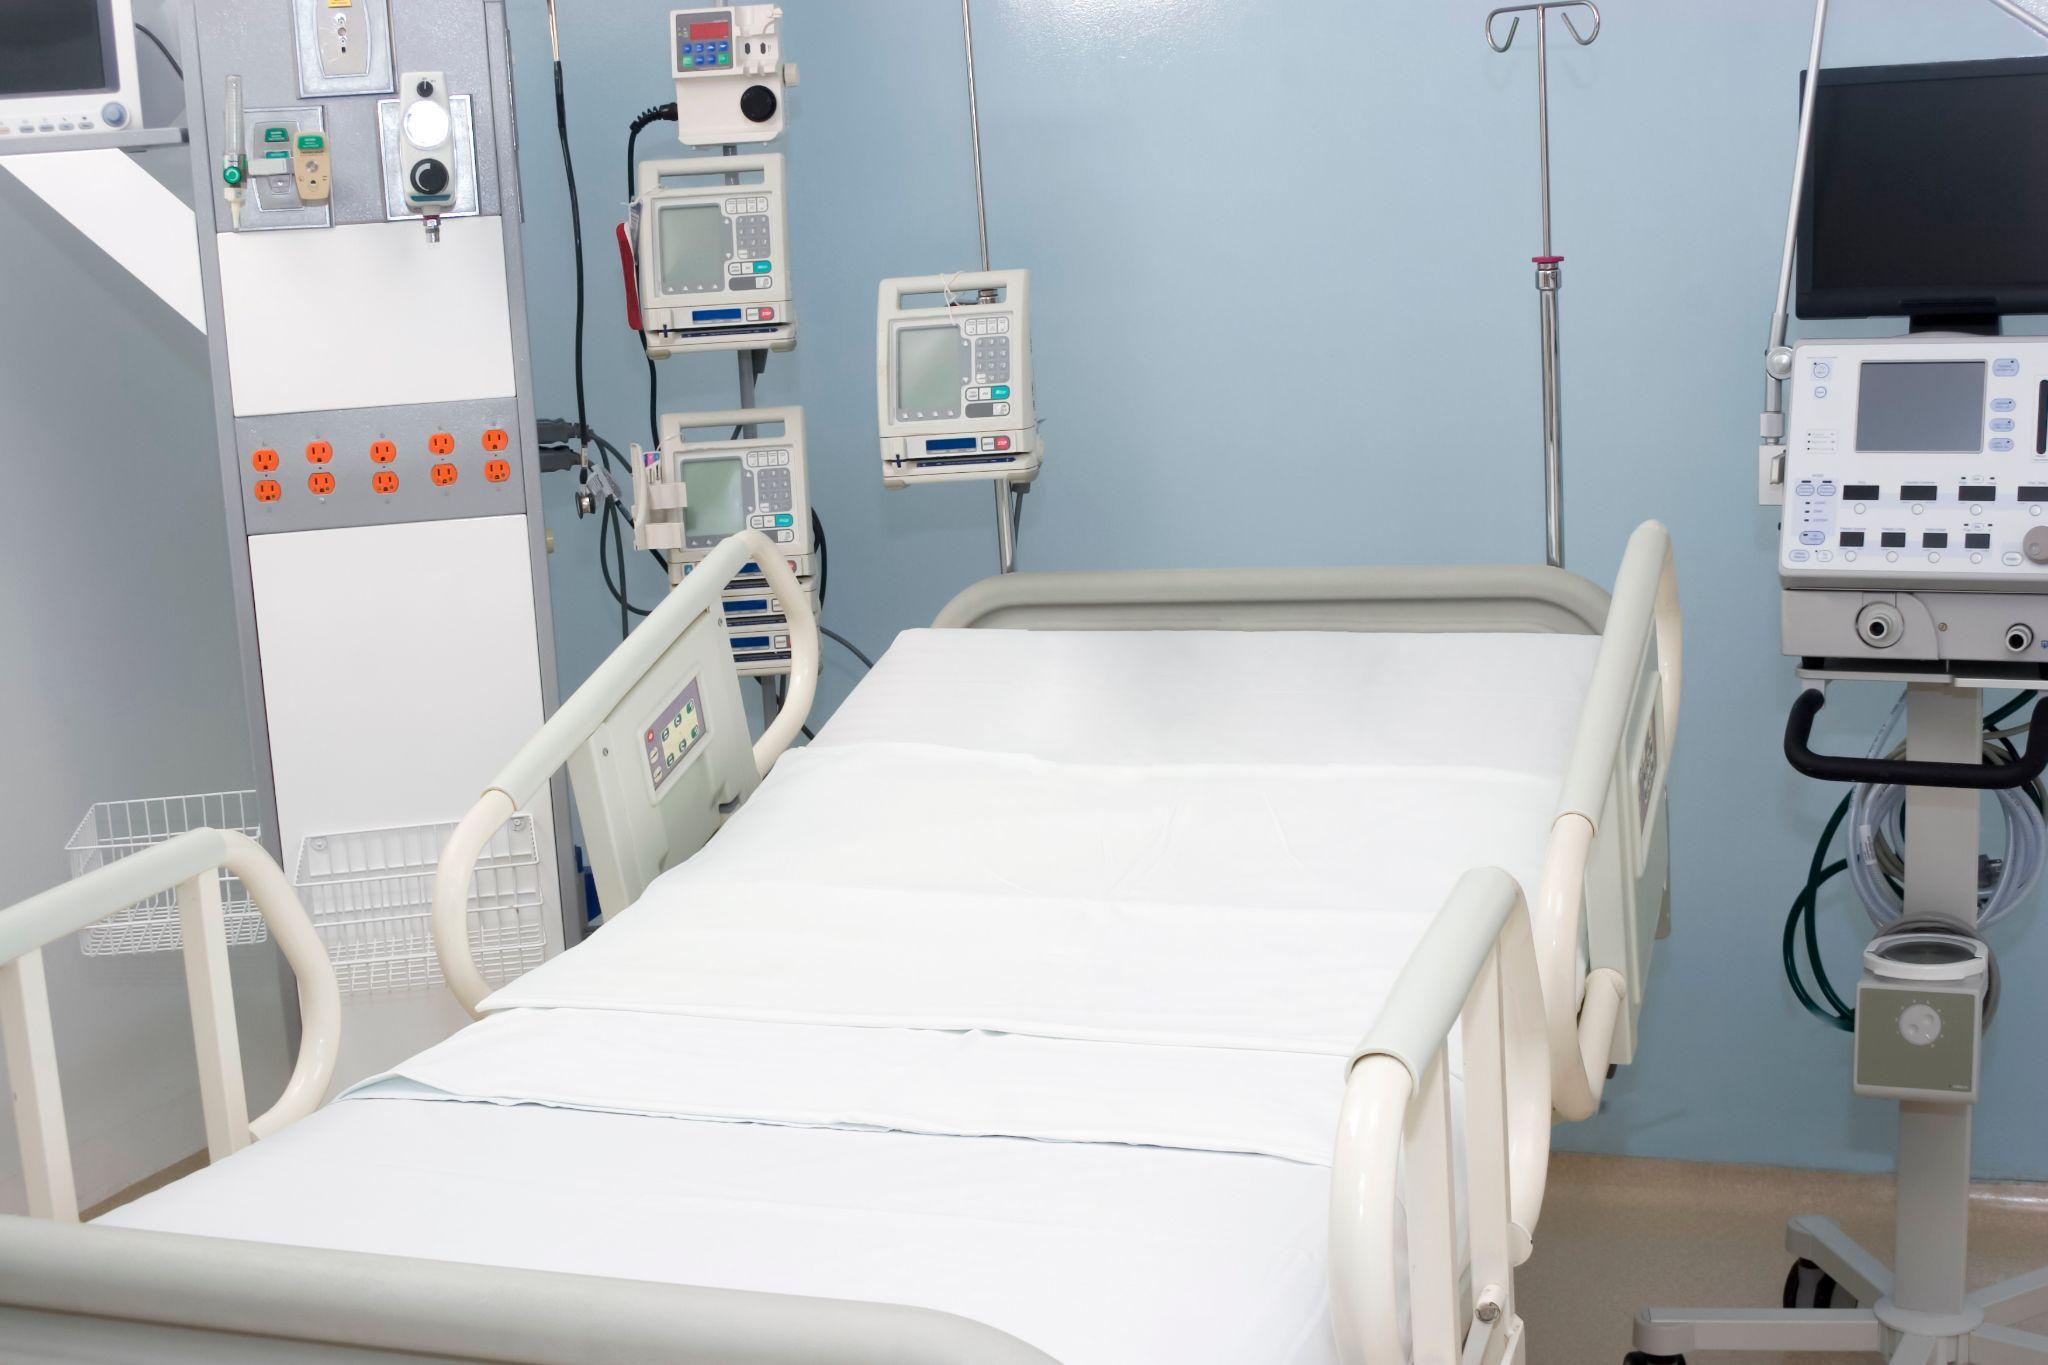 A Hospital Bed With Medical Machines Around It And The Room Is Painted Blue